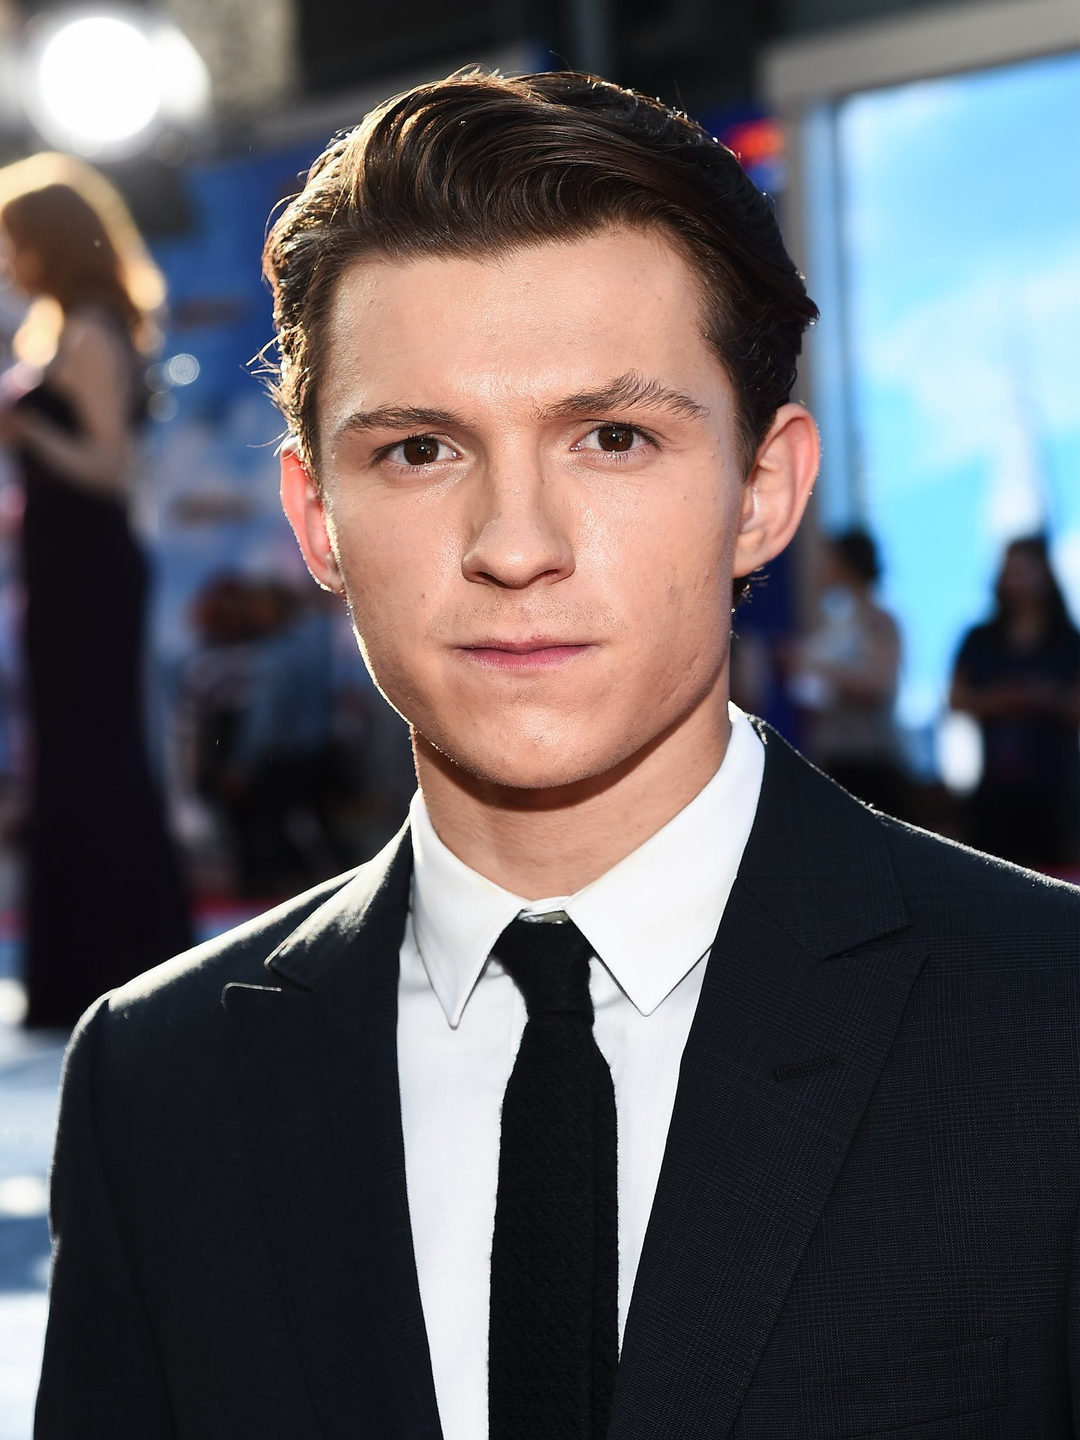 Tom Holland personal life